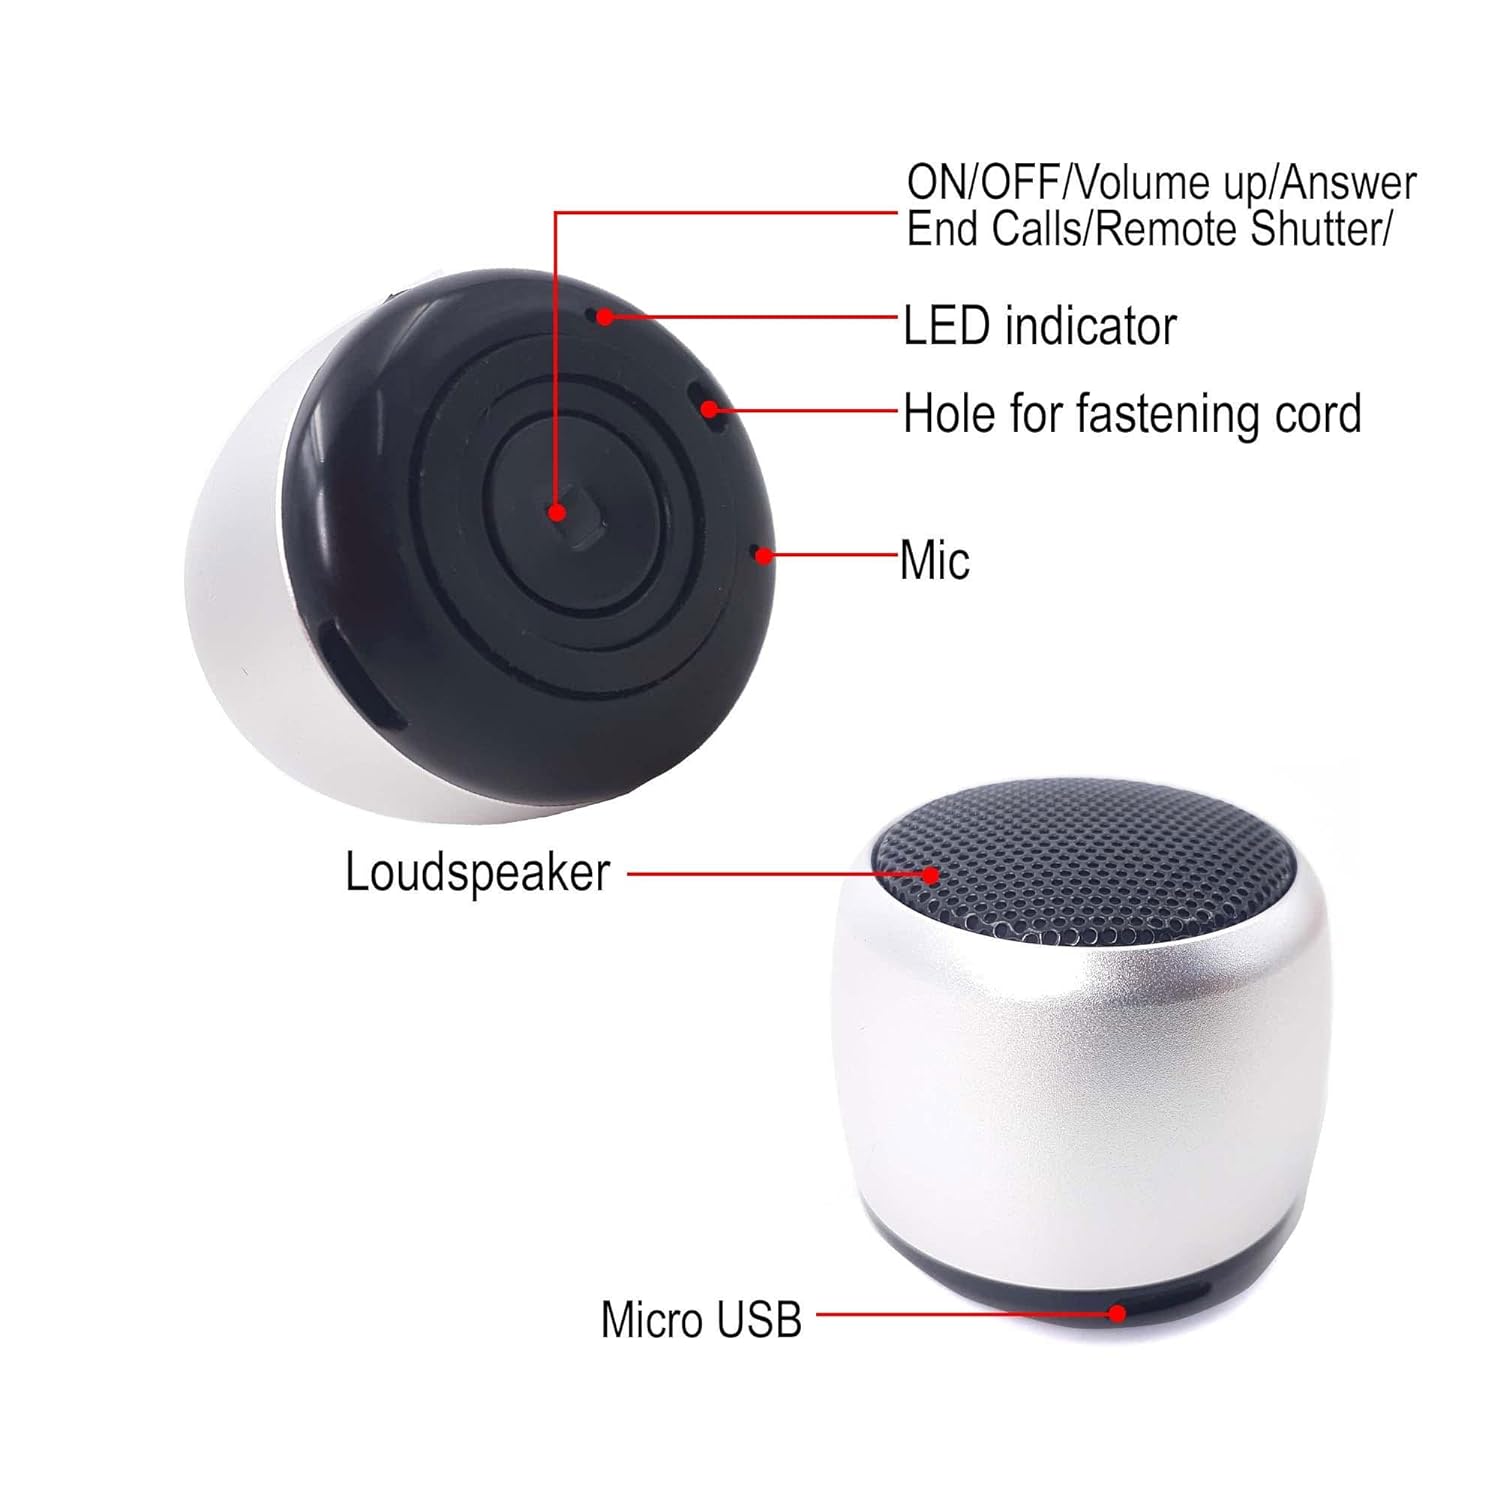  Wireless Speaker   Mini   Hands-free Microphone  Audio Multimedia  Rechargeable   - ONG31 2021-2